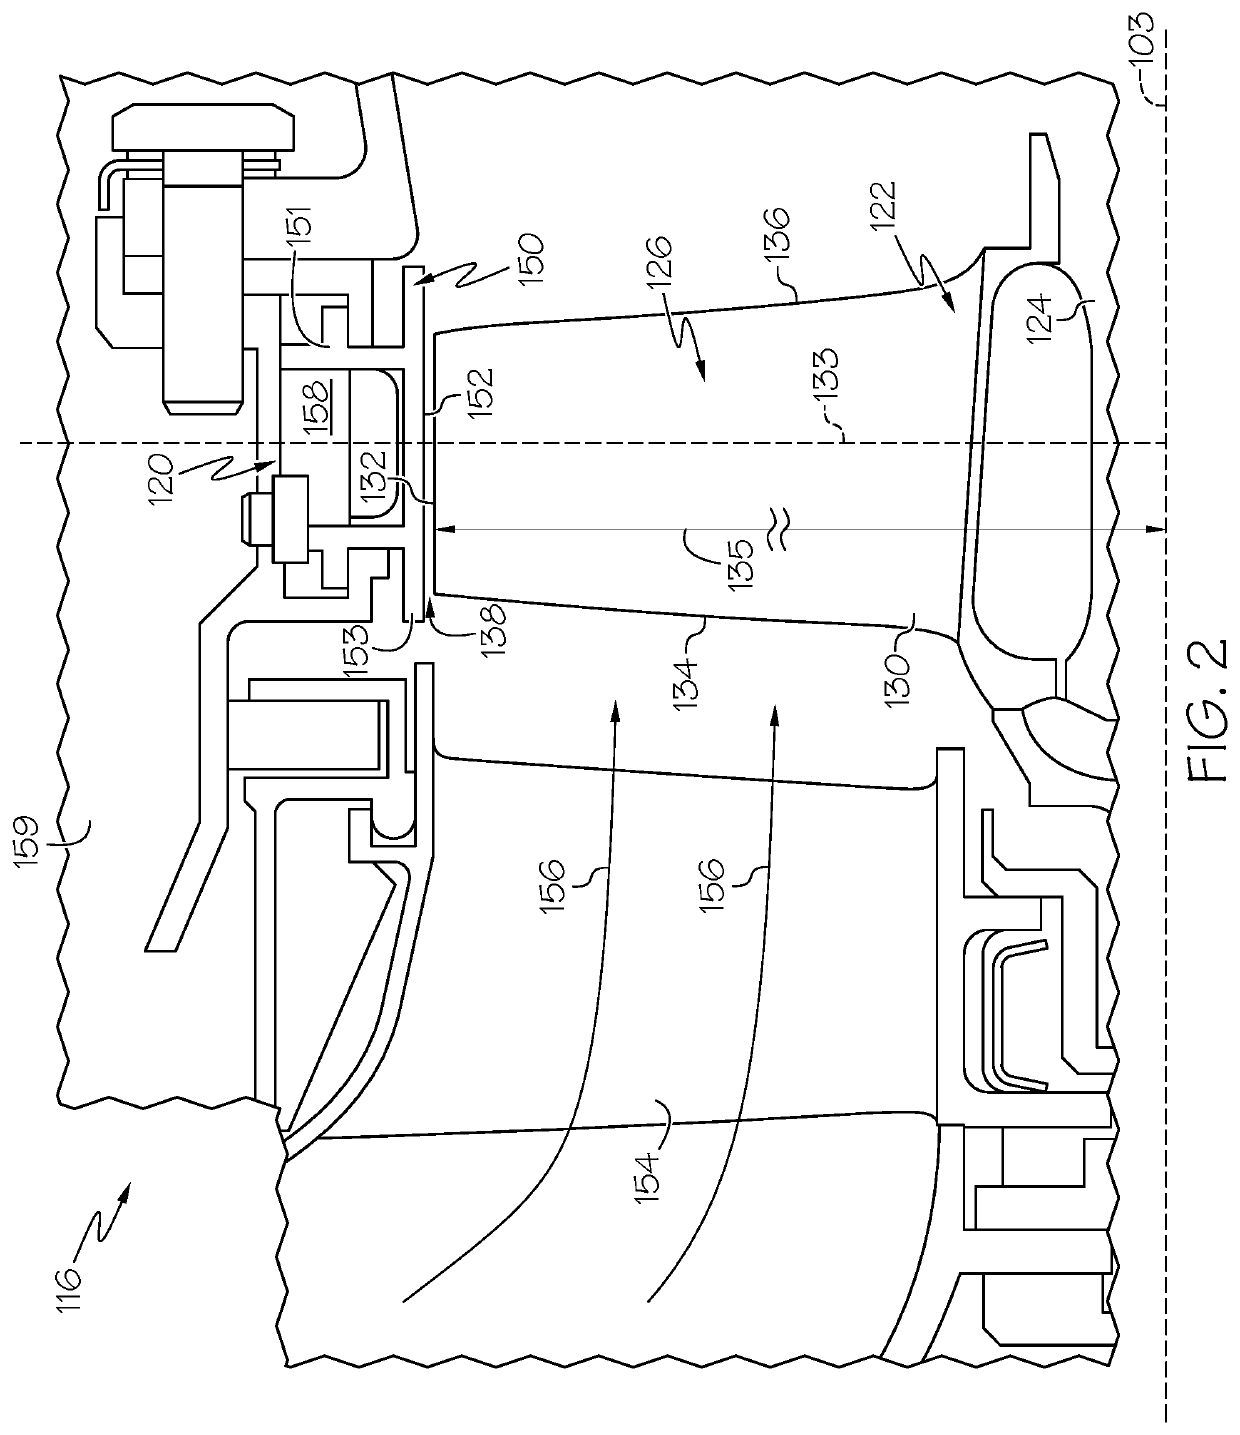 Rotor assembly for in-machine grinding of shroud member and methods of using the same